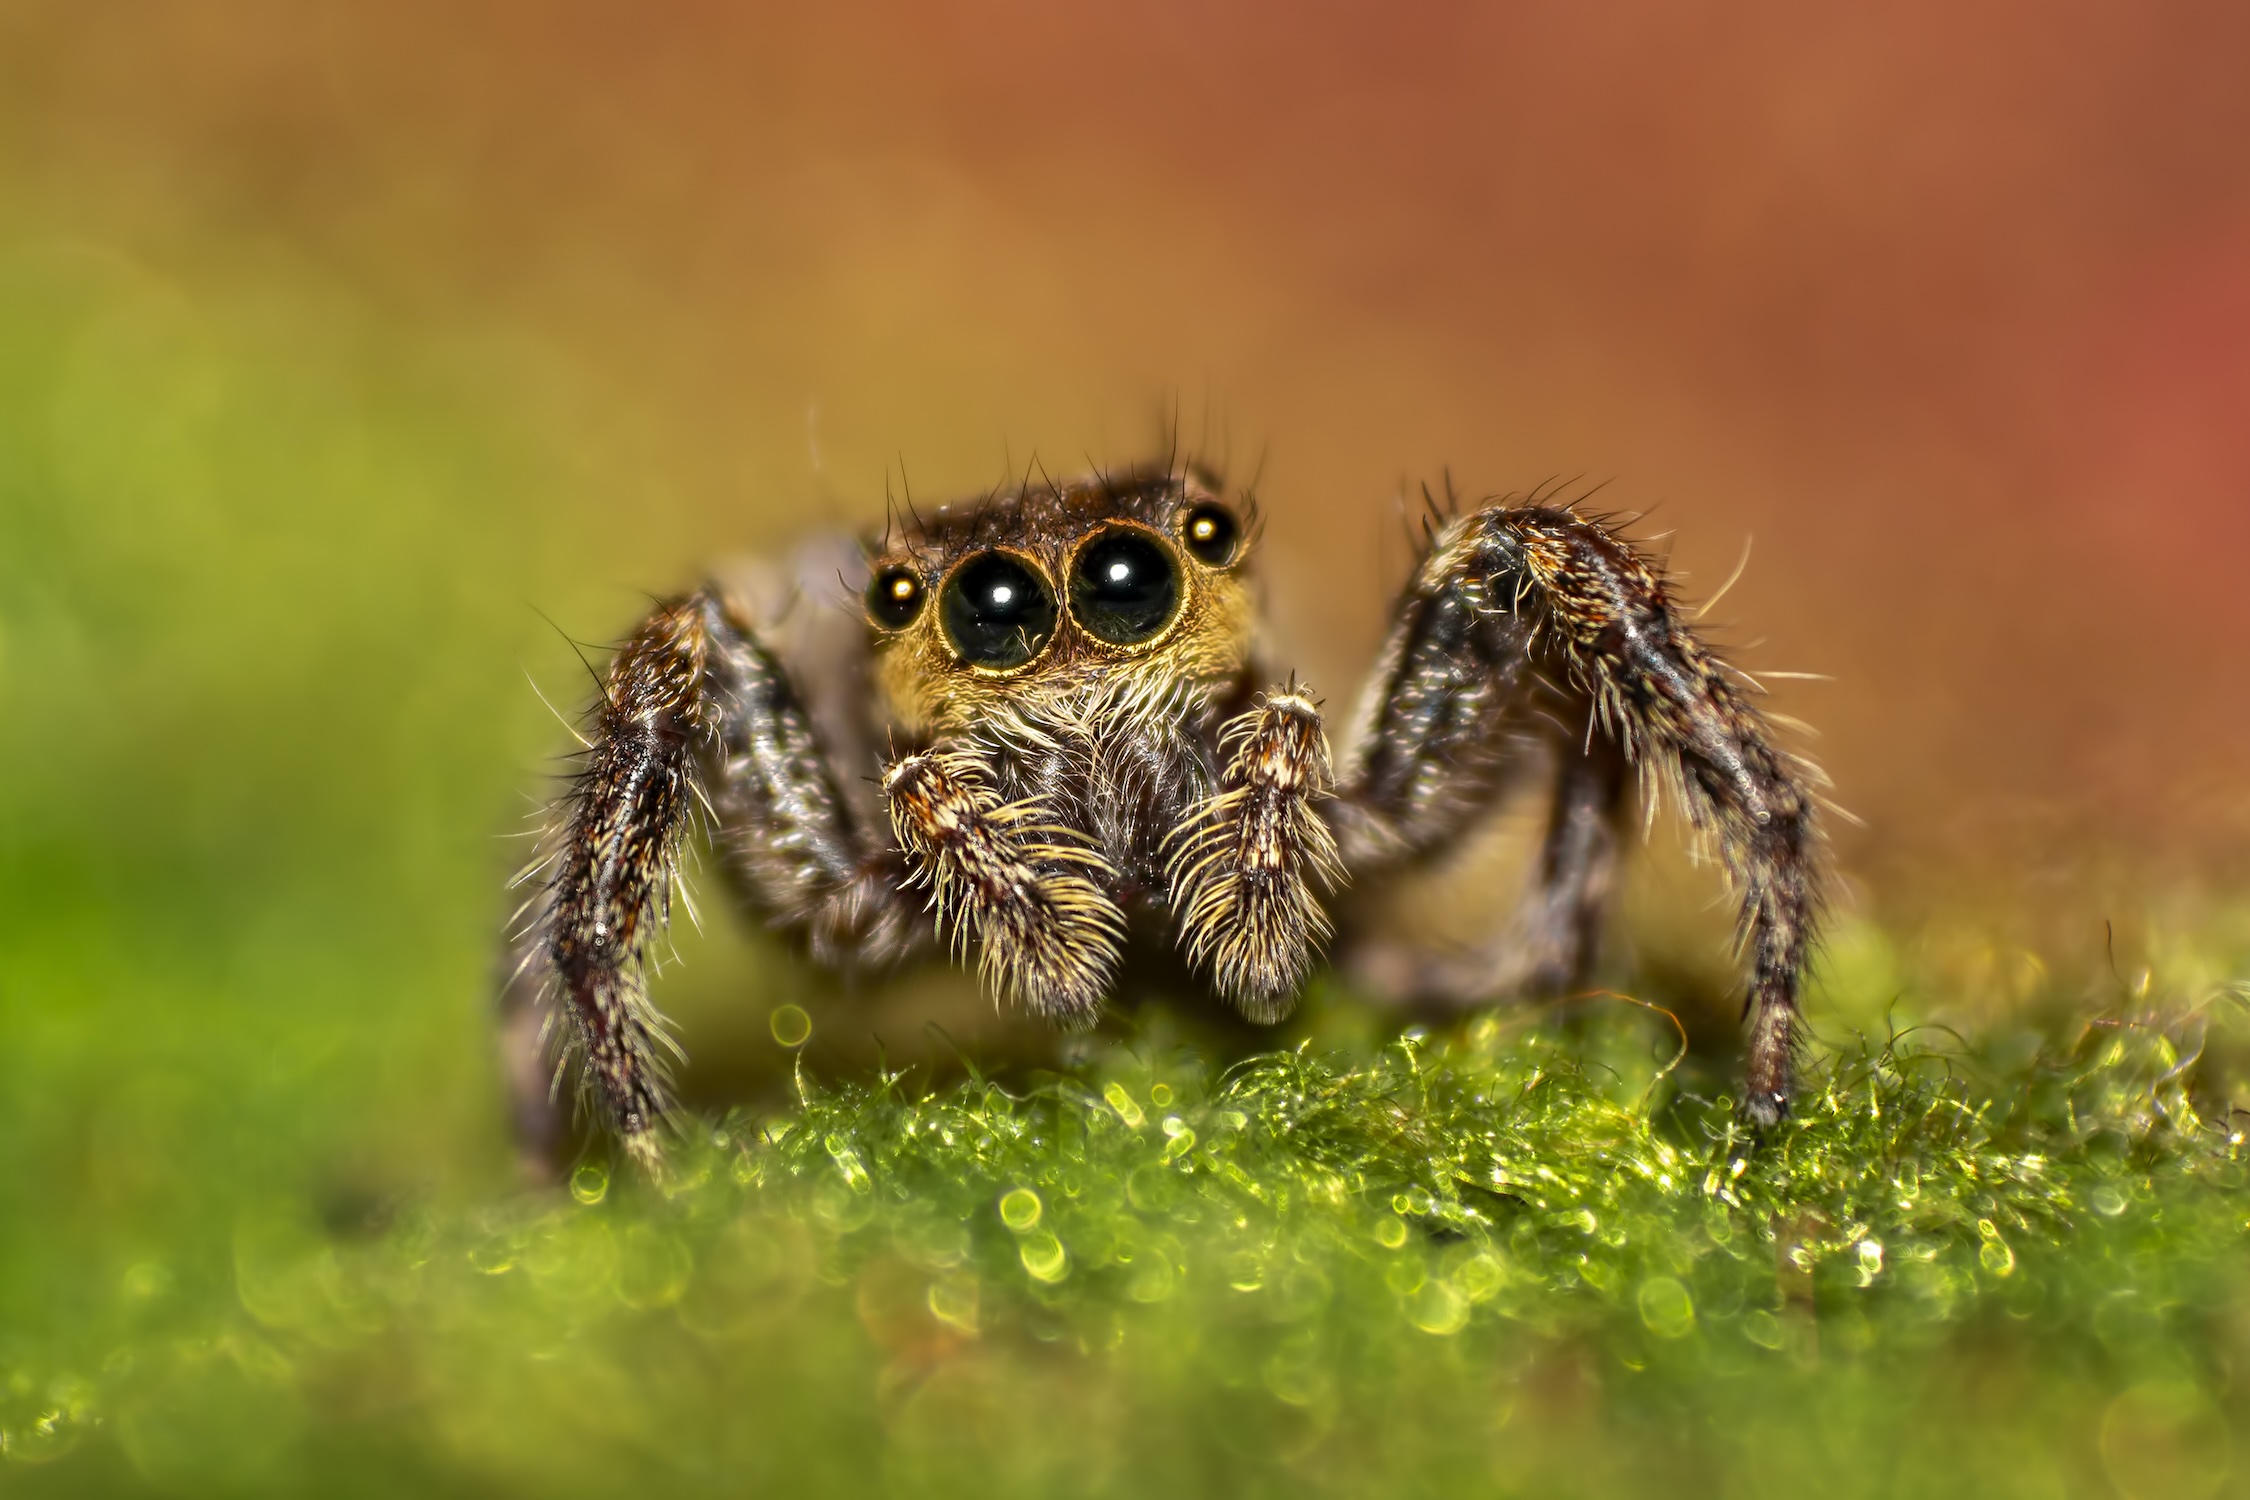 Close-up photography of a spider. Image credit: © Dharmaanjan | Dreamstime